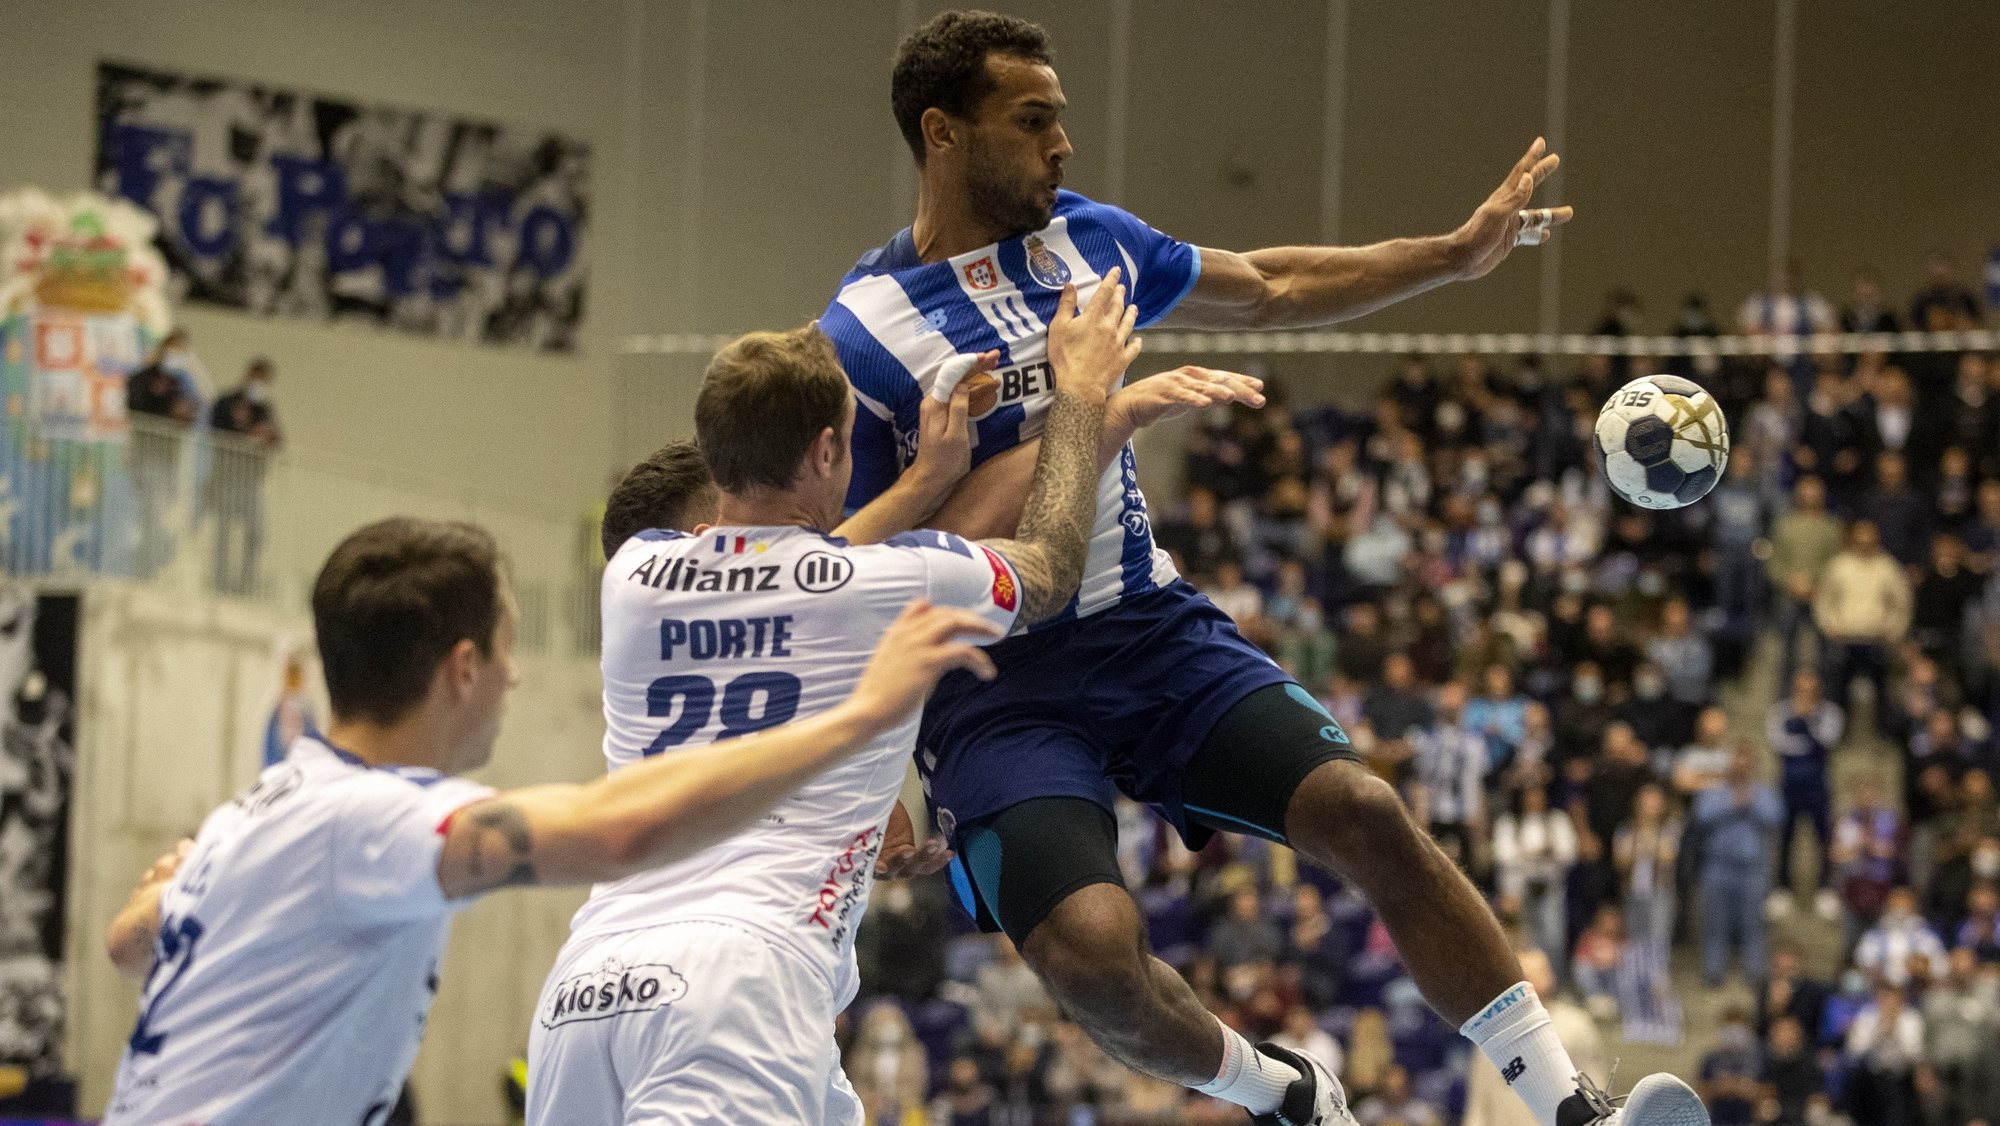 FC Porto&#039;s Djibril M&#039;Bengue (R) in action against Montpellier&#039;s Valentin Porte (C) during their EHF Champions League playoff handball match in Porto, Portugal, 31 March 2022. JOSE COELHO/LUSA